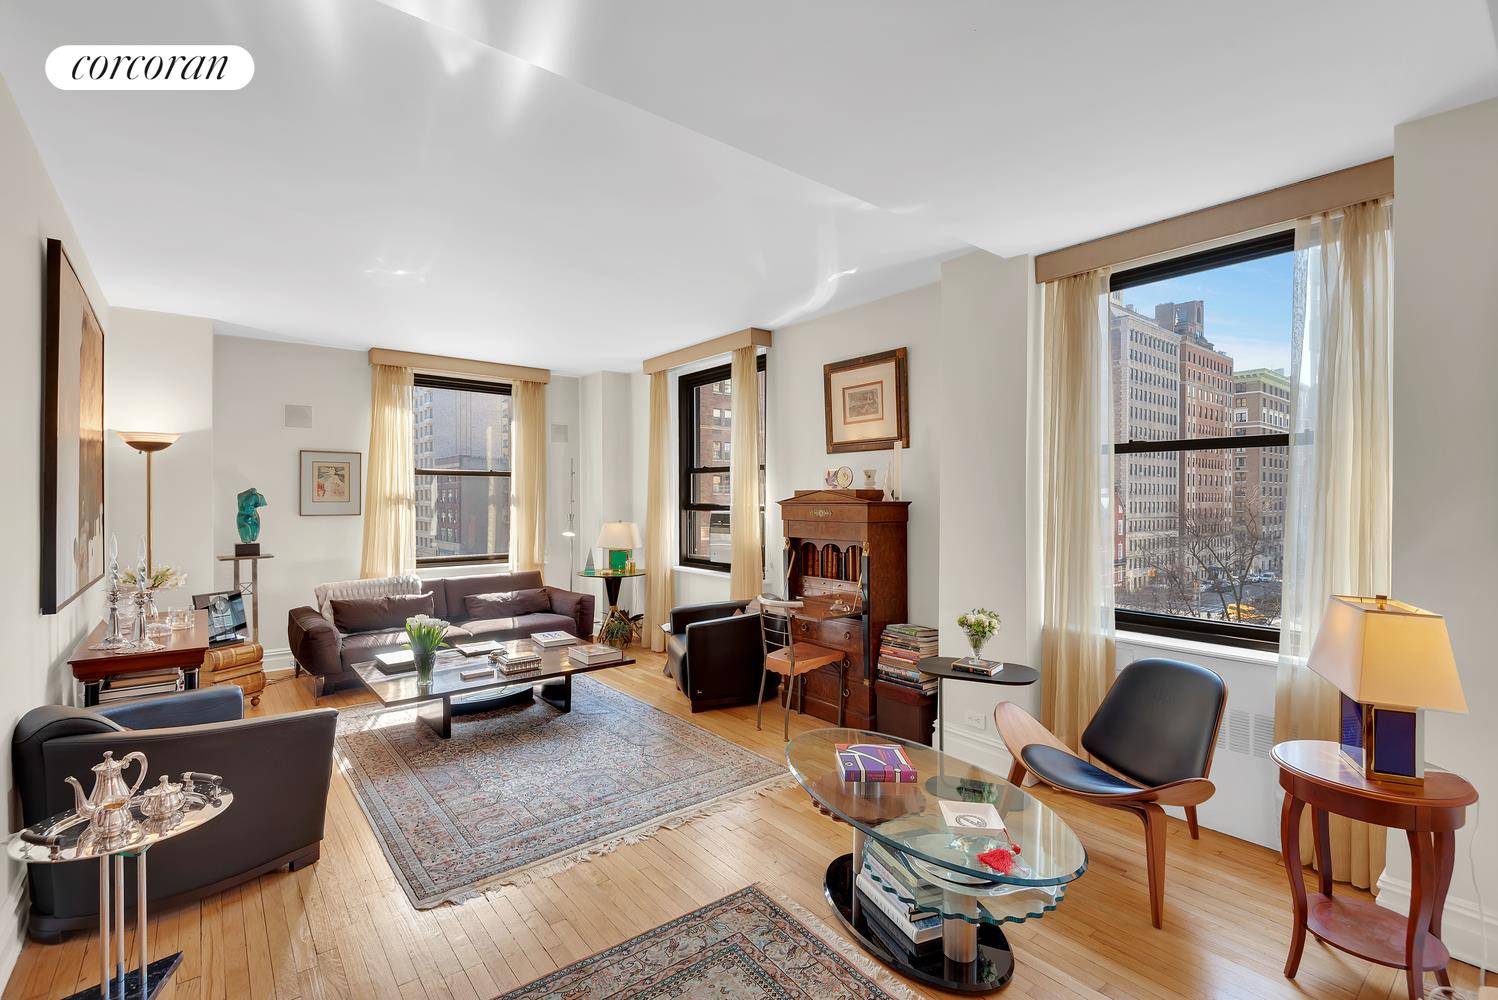 Apartment 5DH at 1040 Park Avenue is a gracious and expansive, sun filled 8 room combination home with abundant flexibility for its new owner.